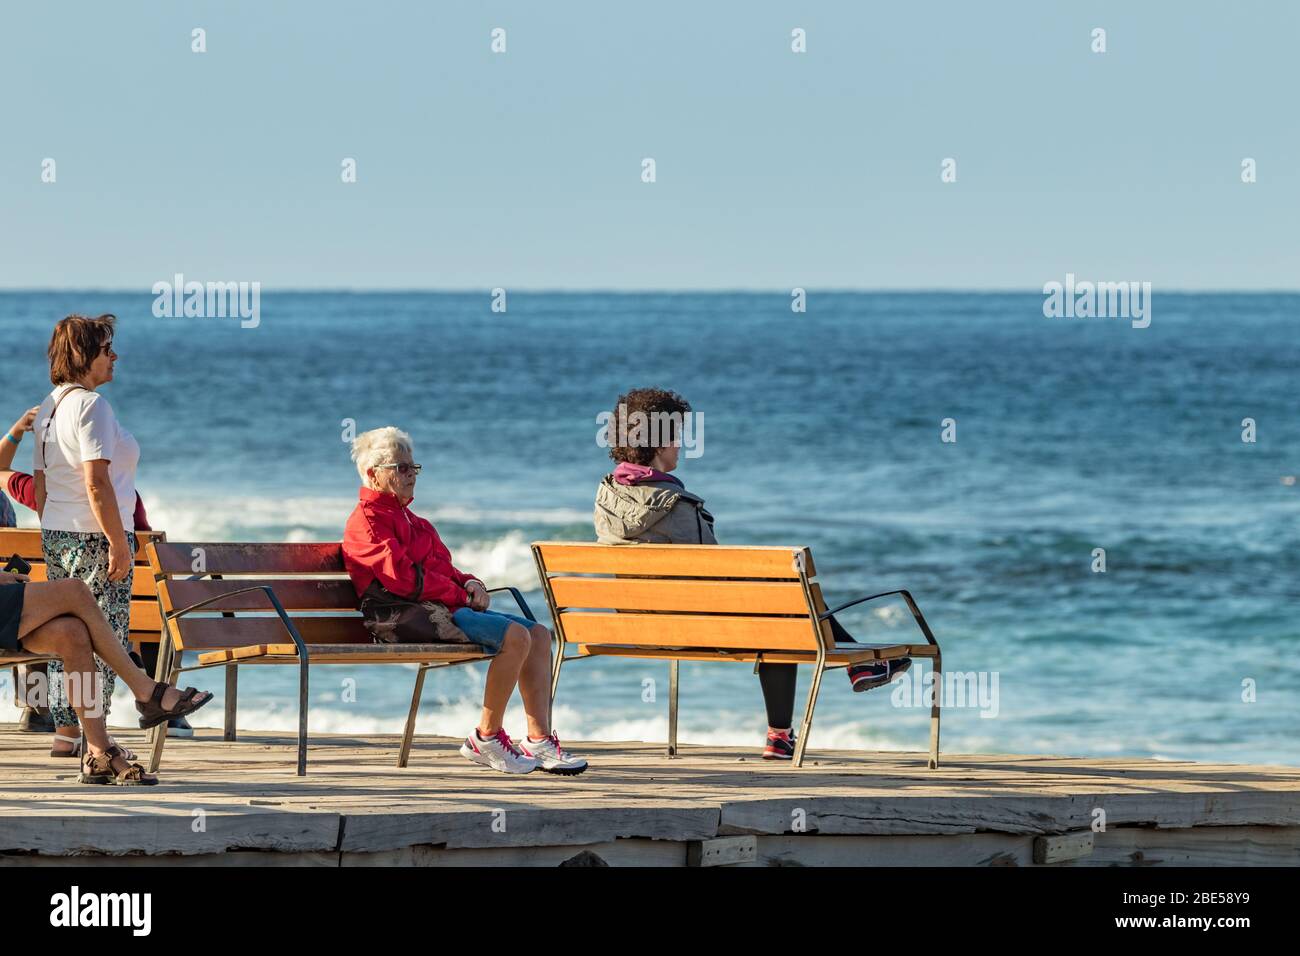 Las Americas,Tenerife, Spain - January 21, 2020: People on the waterfront, walking on promenade and relax sitting on benches near the sea on blue sky Stock Photo